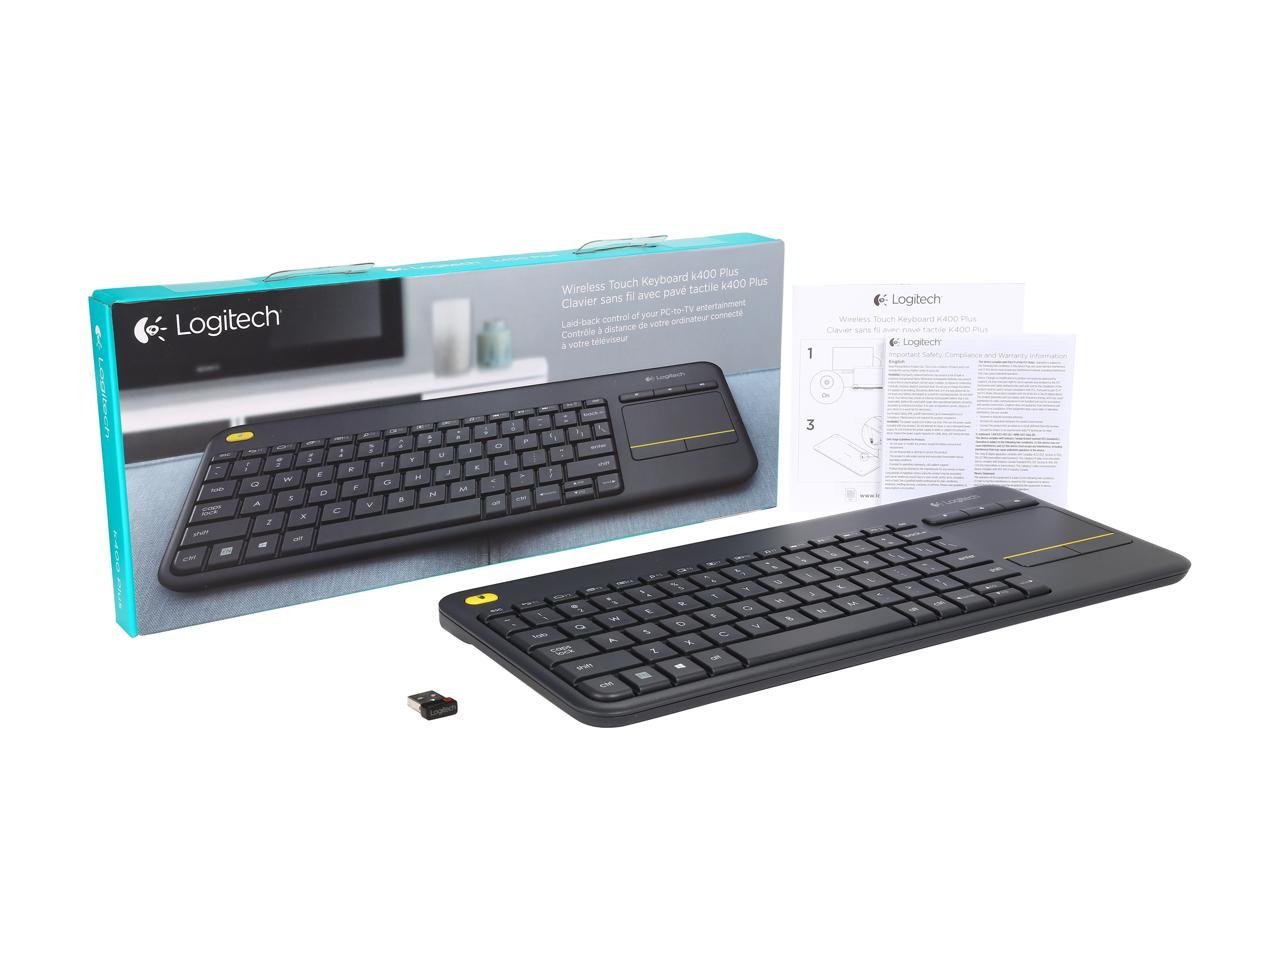 Logitech K400 Plus Wireless Touch Keyboard with Built-In Touchpad for Internet-Connected TVs